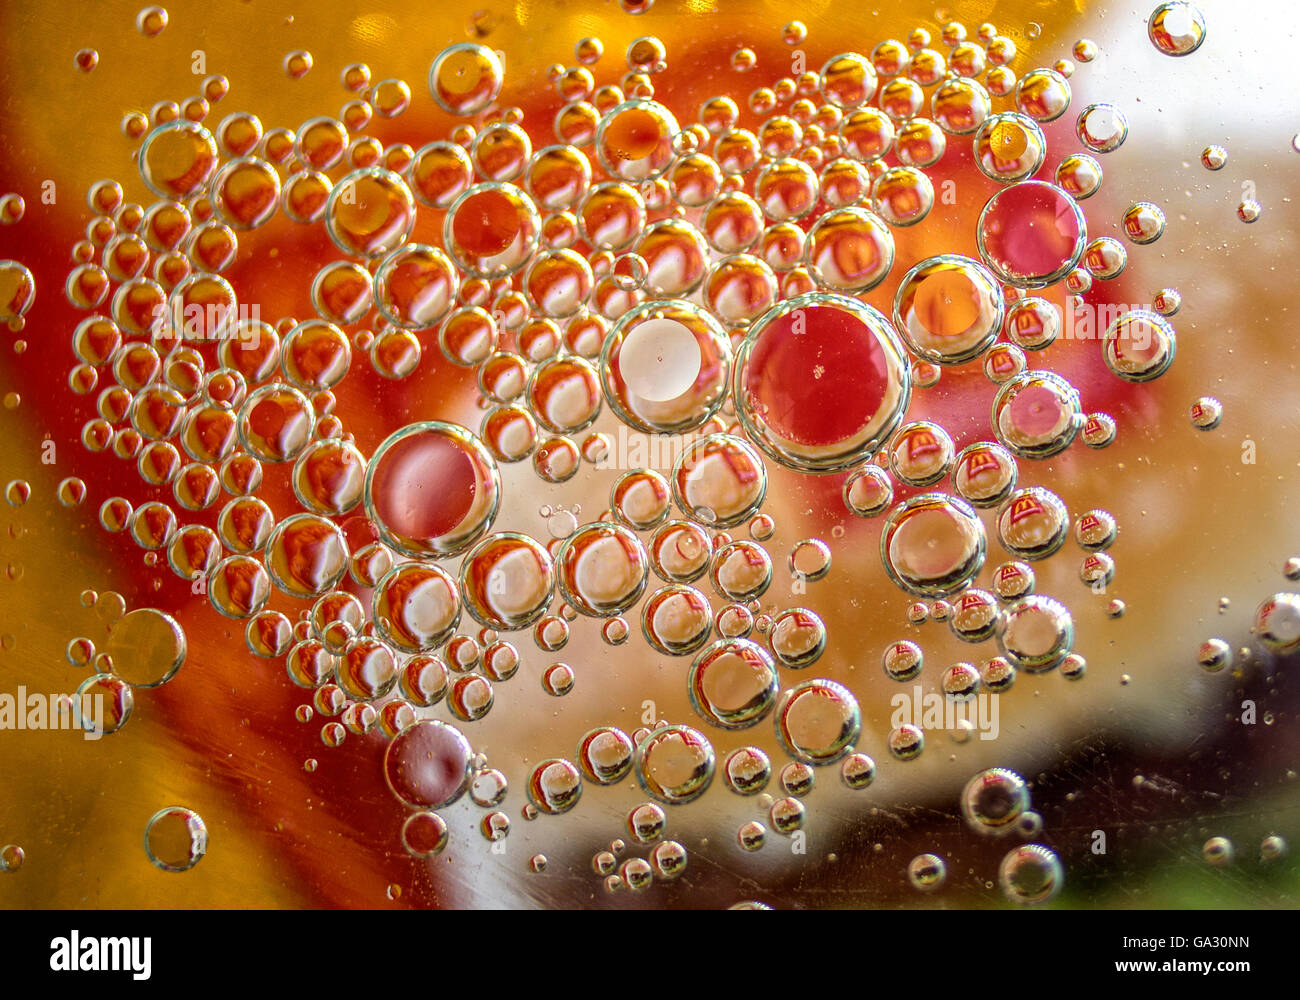 abstract, yellow, color, droplet, gold, Stock Photo